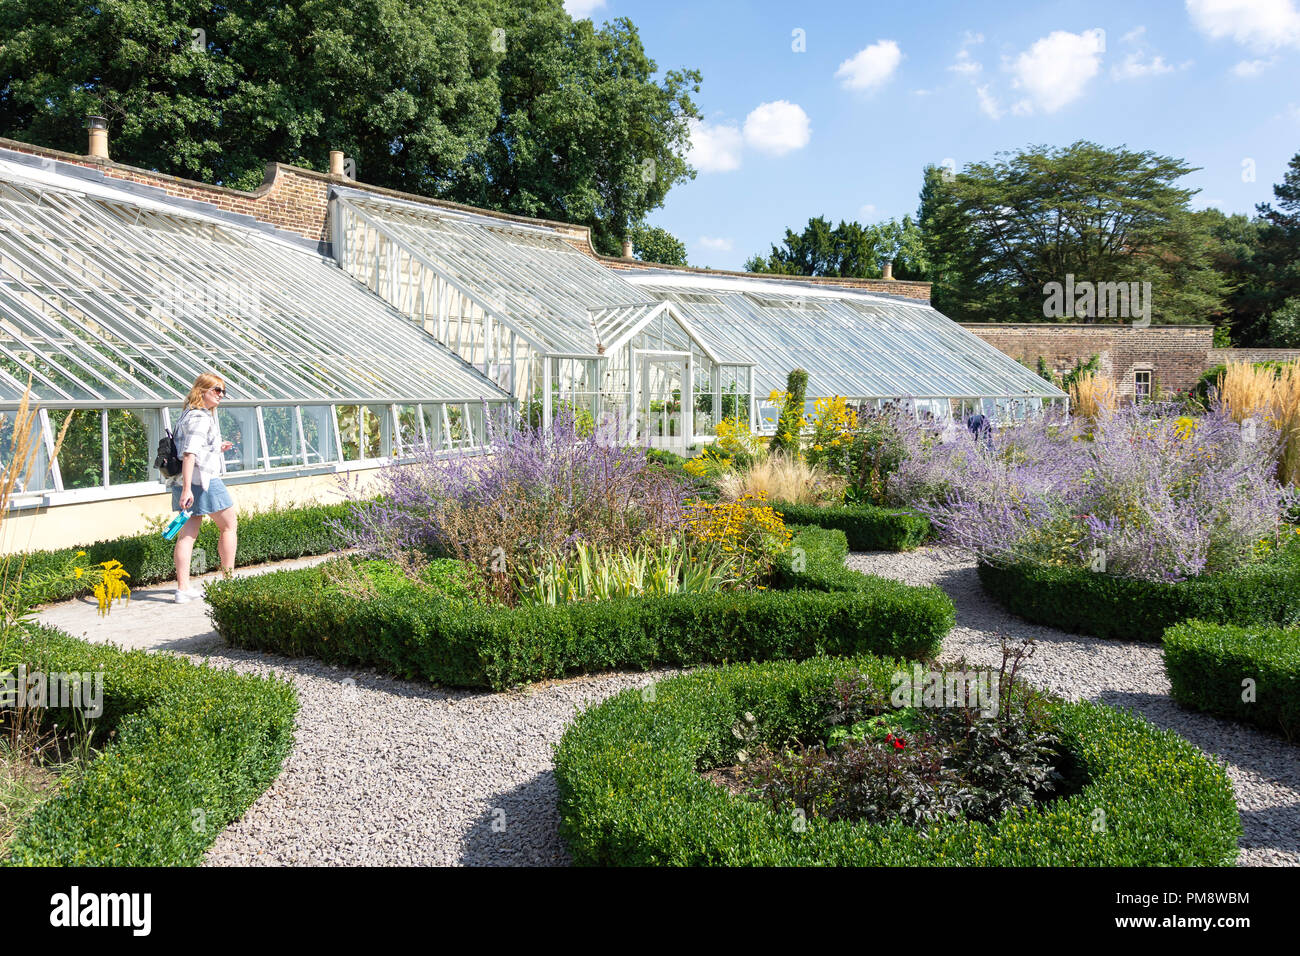 The Walled Garden and glasshouse at Fulham Palace, Fulham, London Borough of Hammersmith and Fulham, Greater London, England, United Kingdom Stock Photo